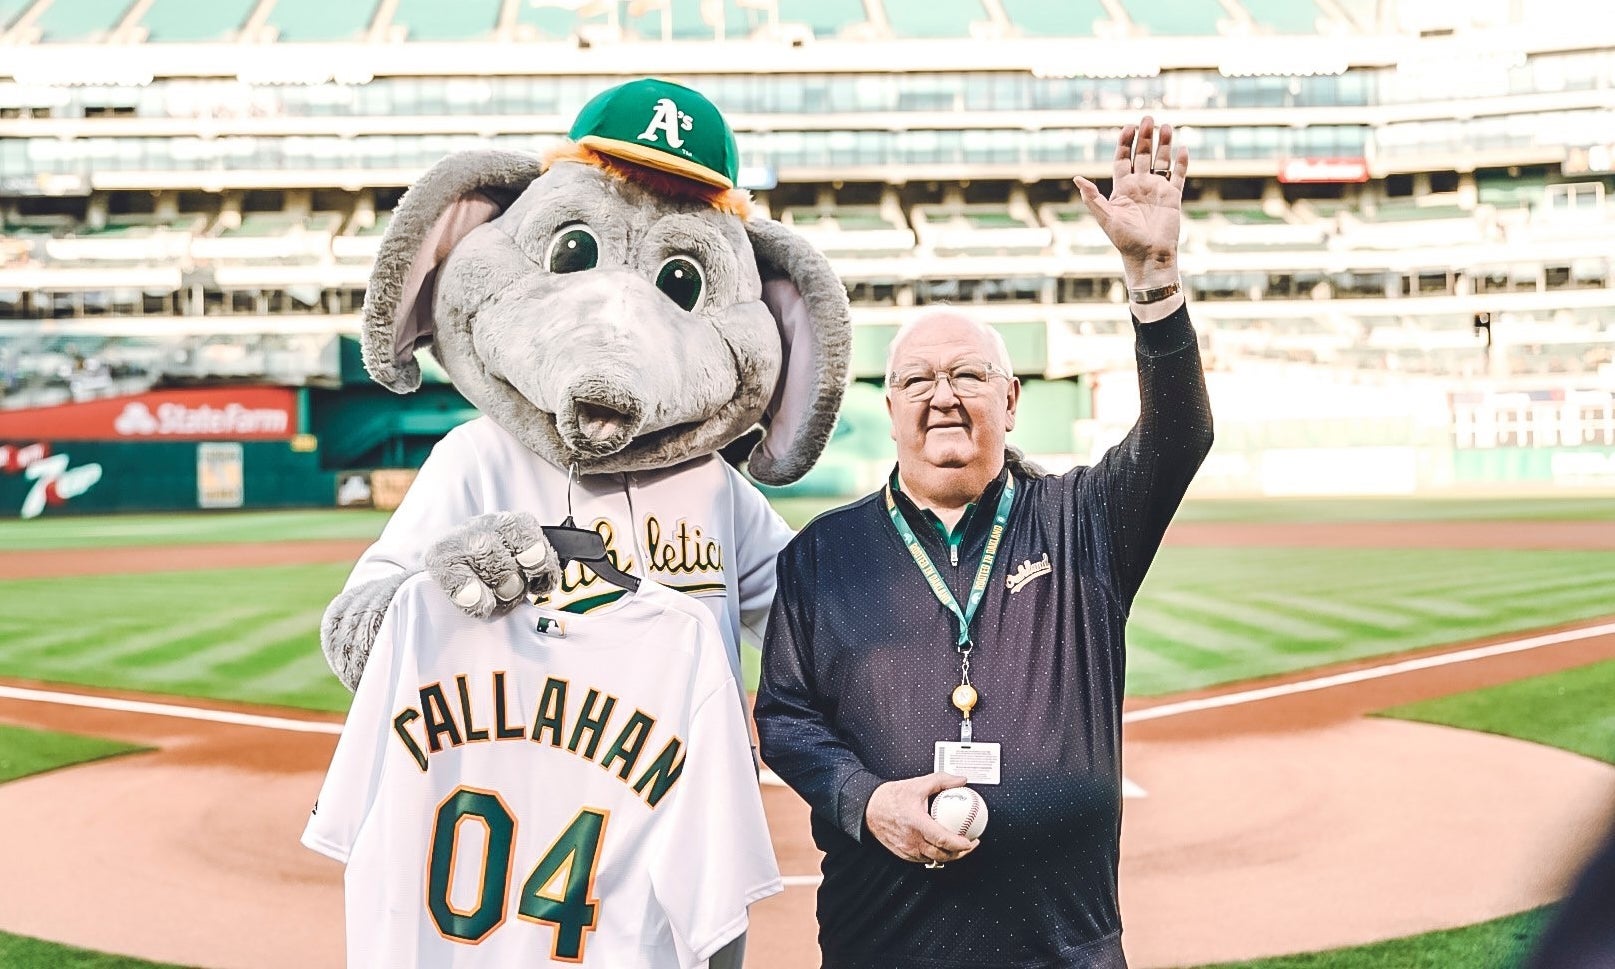 Oakland Athletics announcer Dick Callahan with A's mascot, Stomper the elephant.